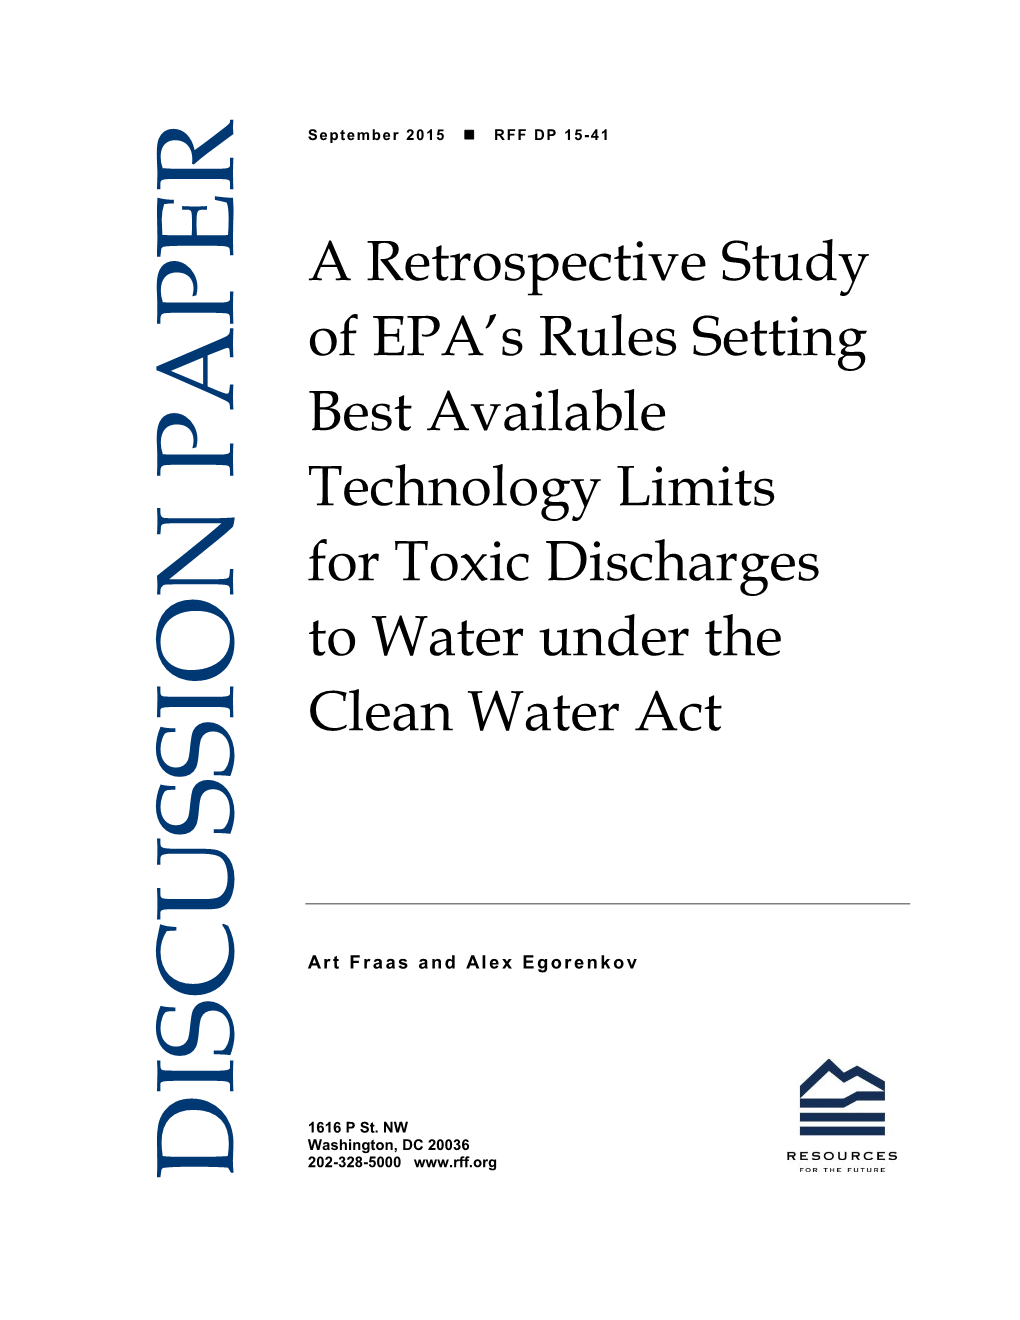 A Retrospective Study of EPA's Rules Setting Best Available Technology